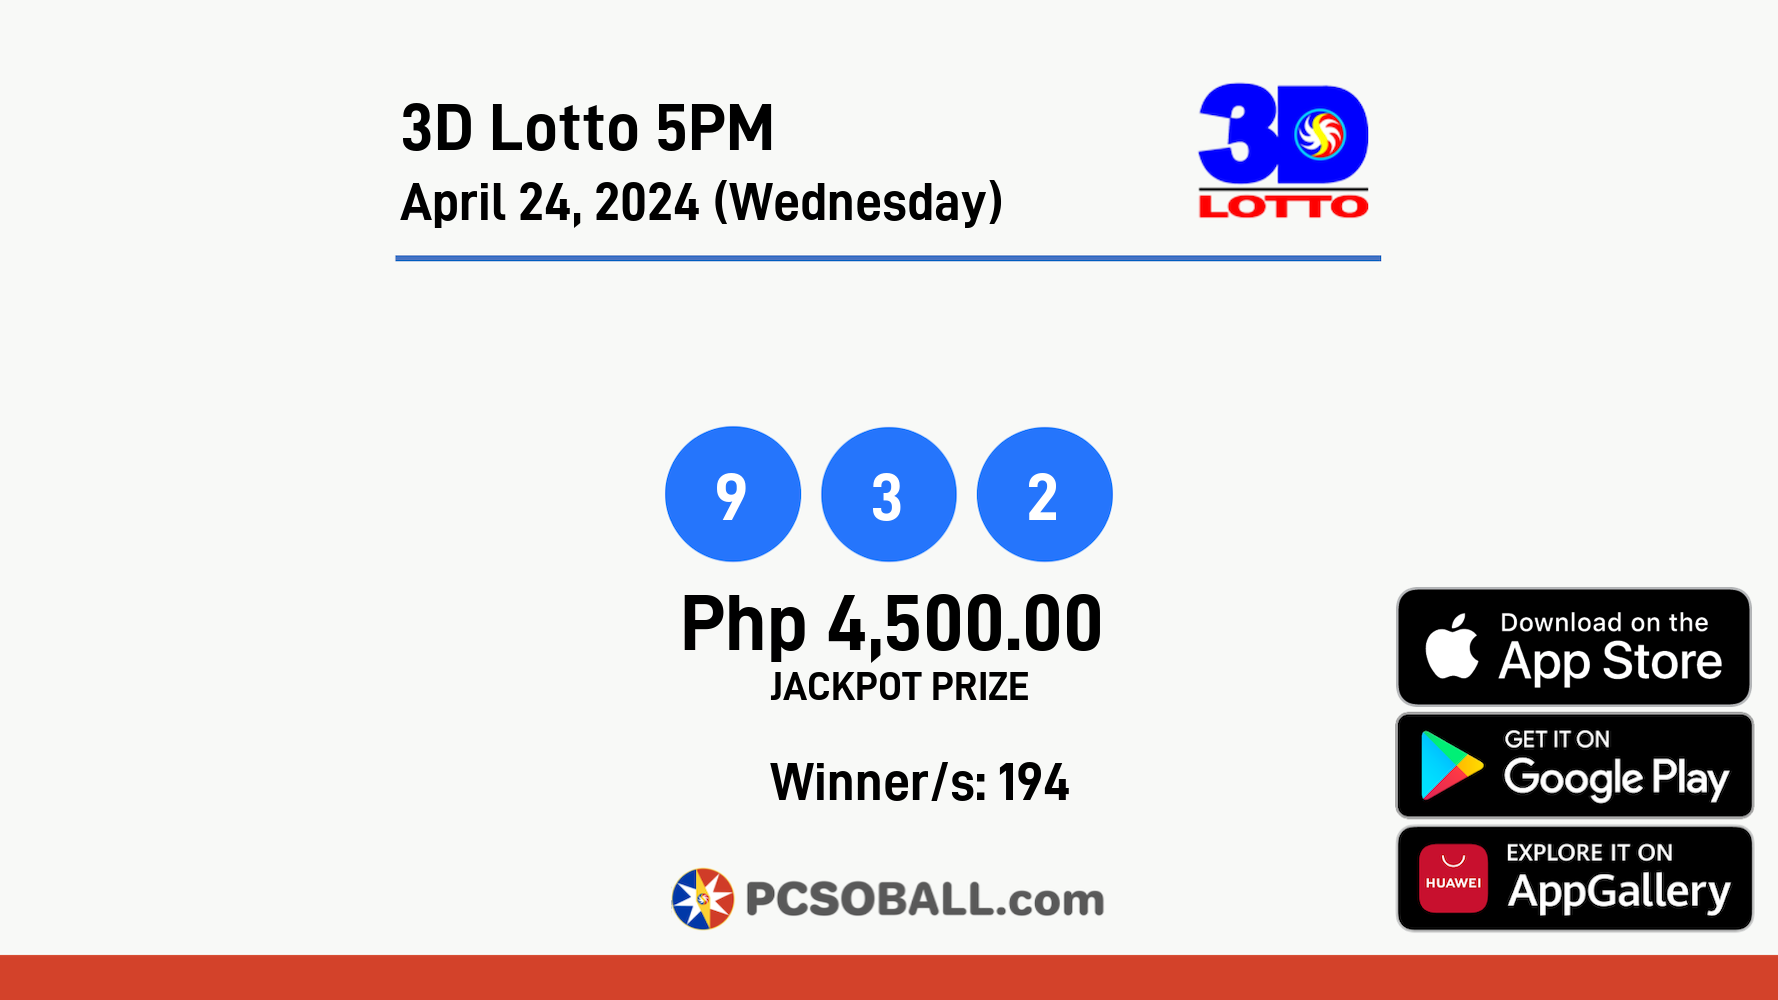 3D Lotto 5PM April 24, 2024 (Wednesday) Result